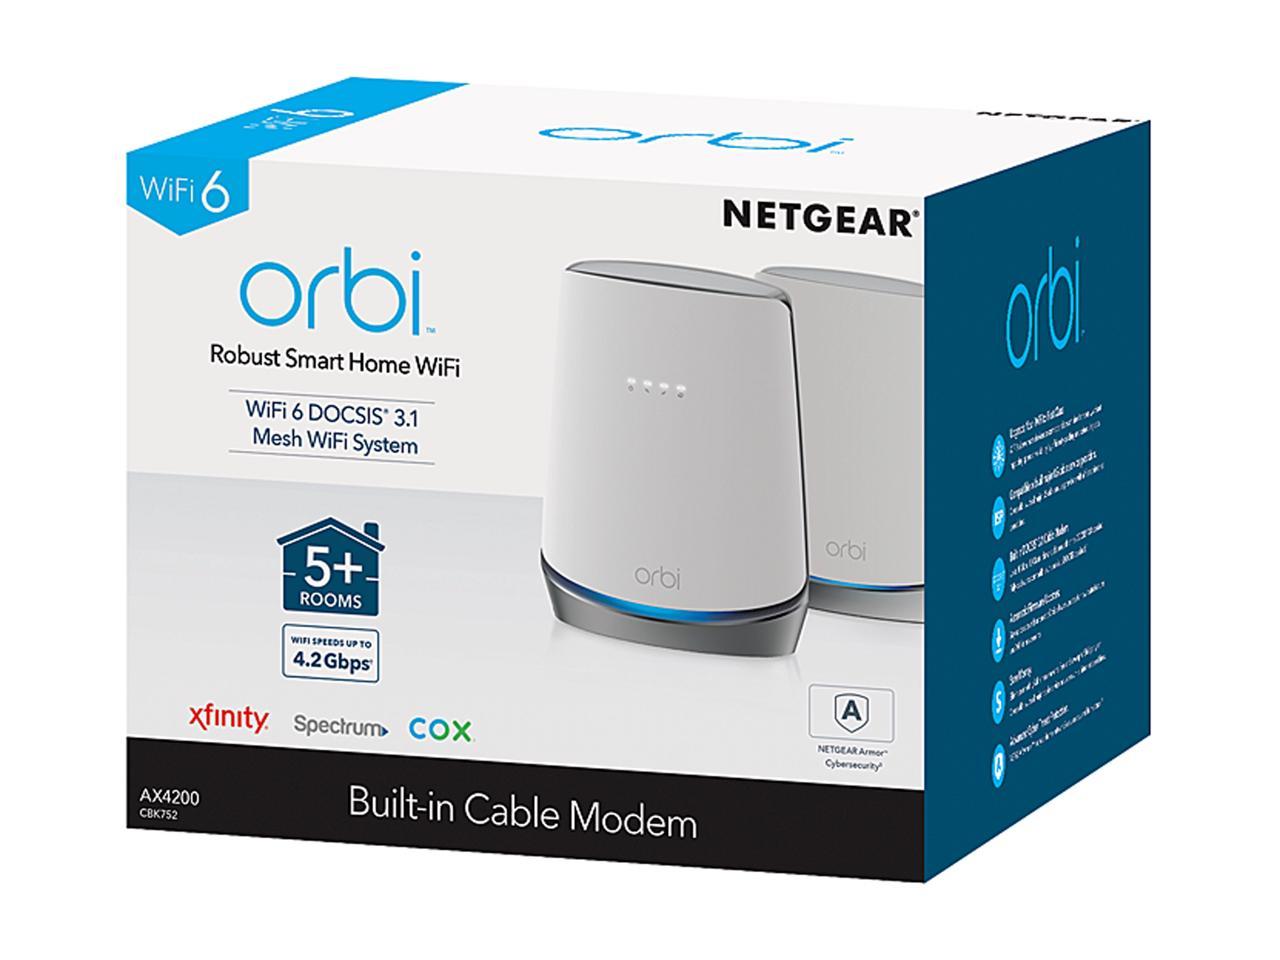 NETGEAR Orbi Whole Home WiFi 6 System with DOCSIS 3.1 Built-in Cable